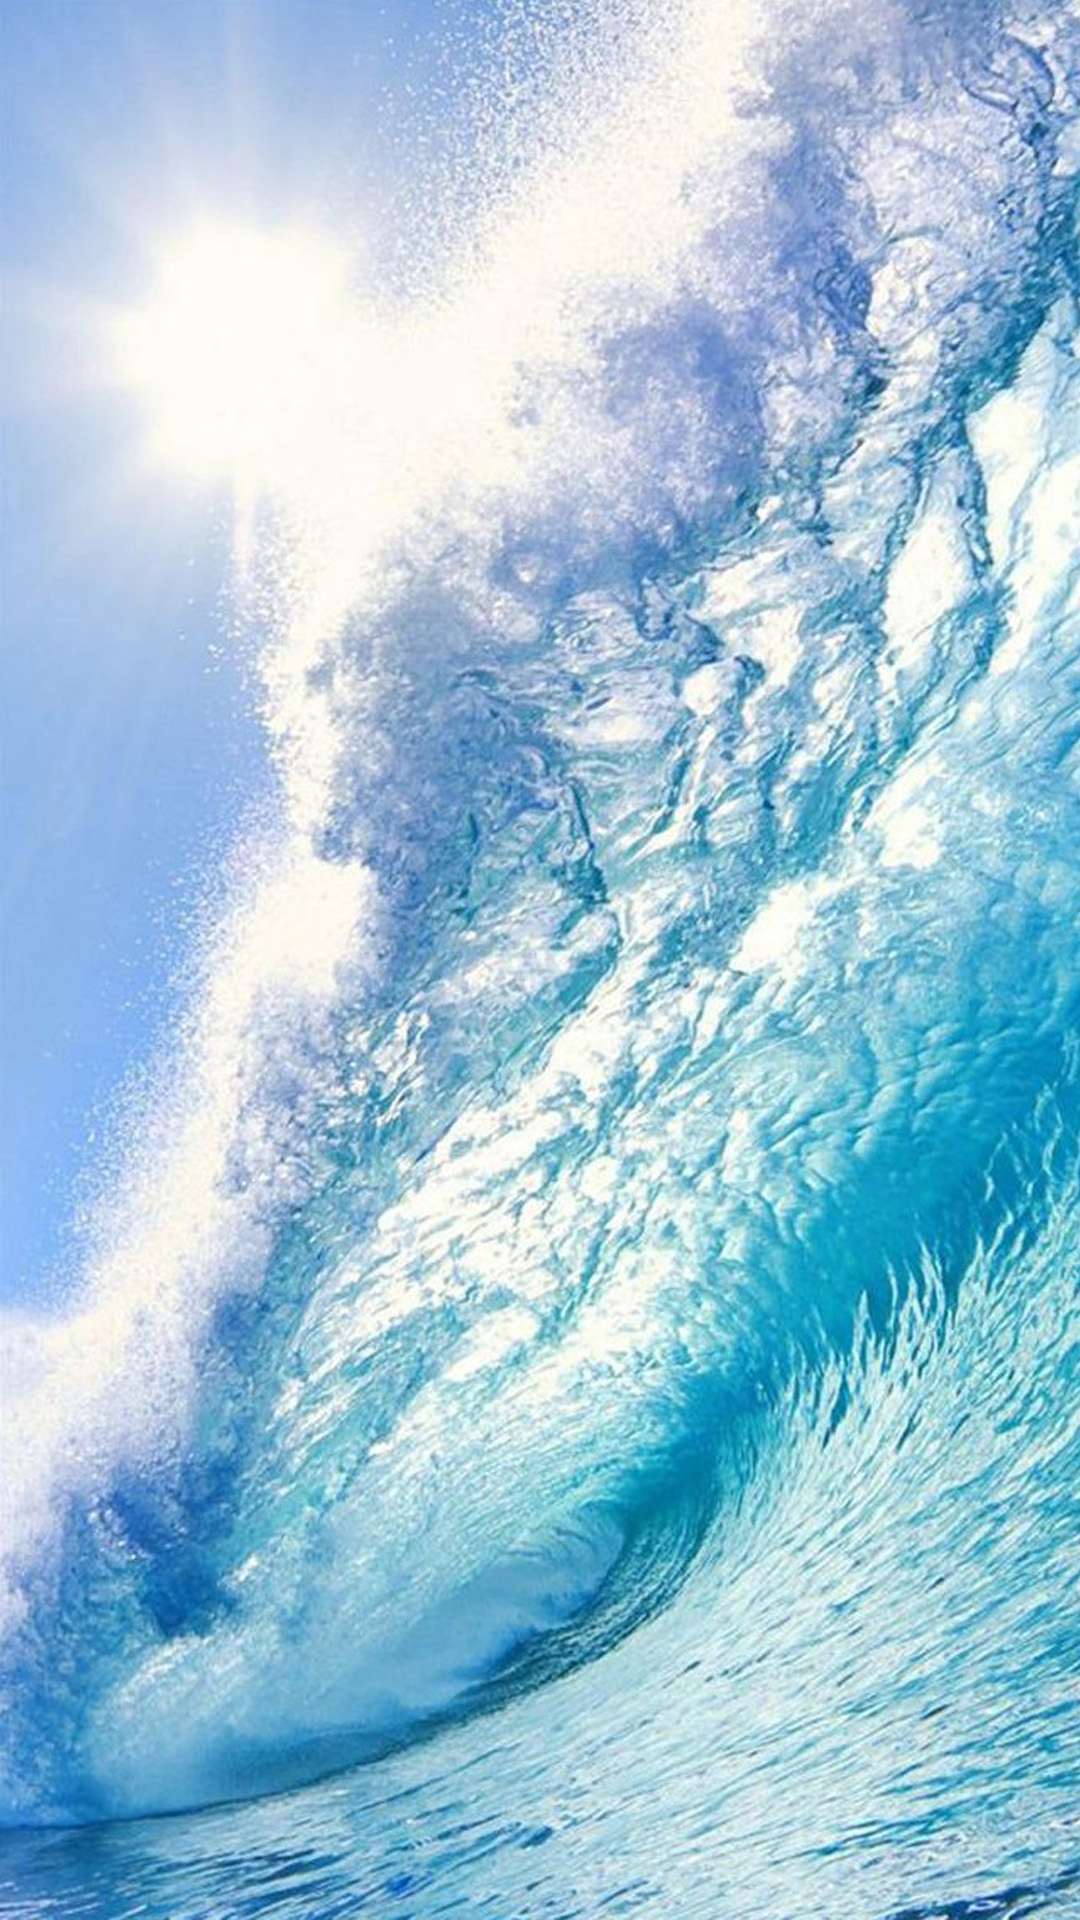 Beach Surf Wave Sea Android Wallpaper free download